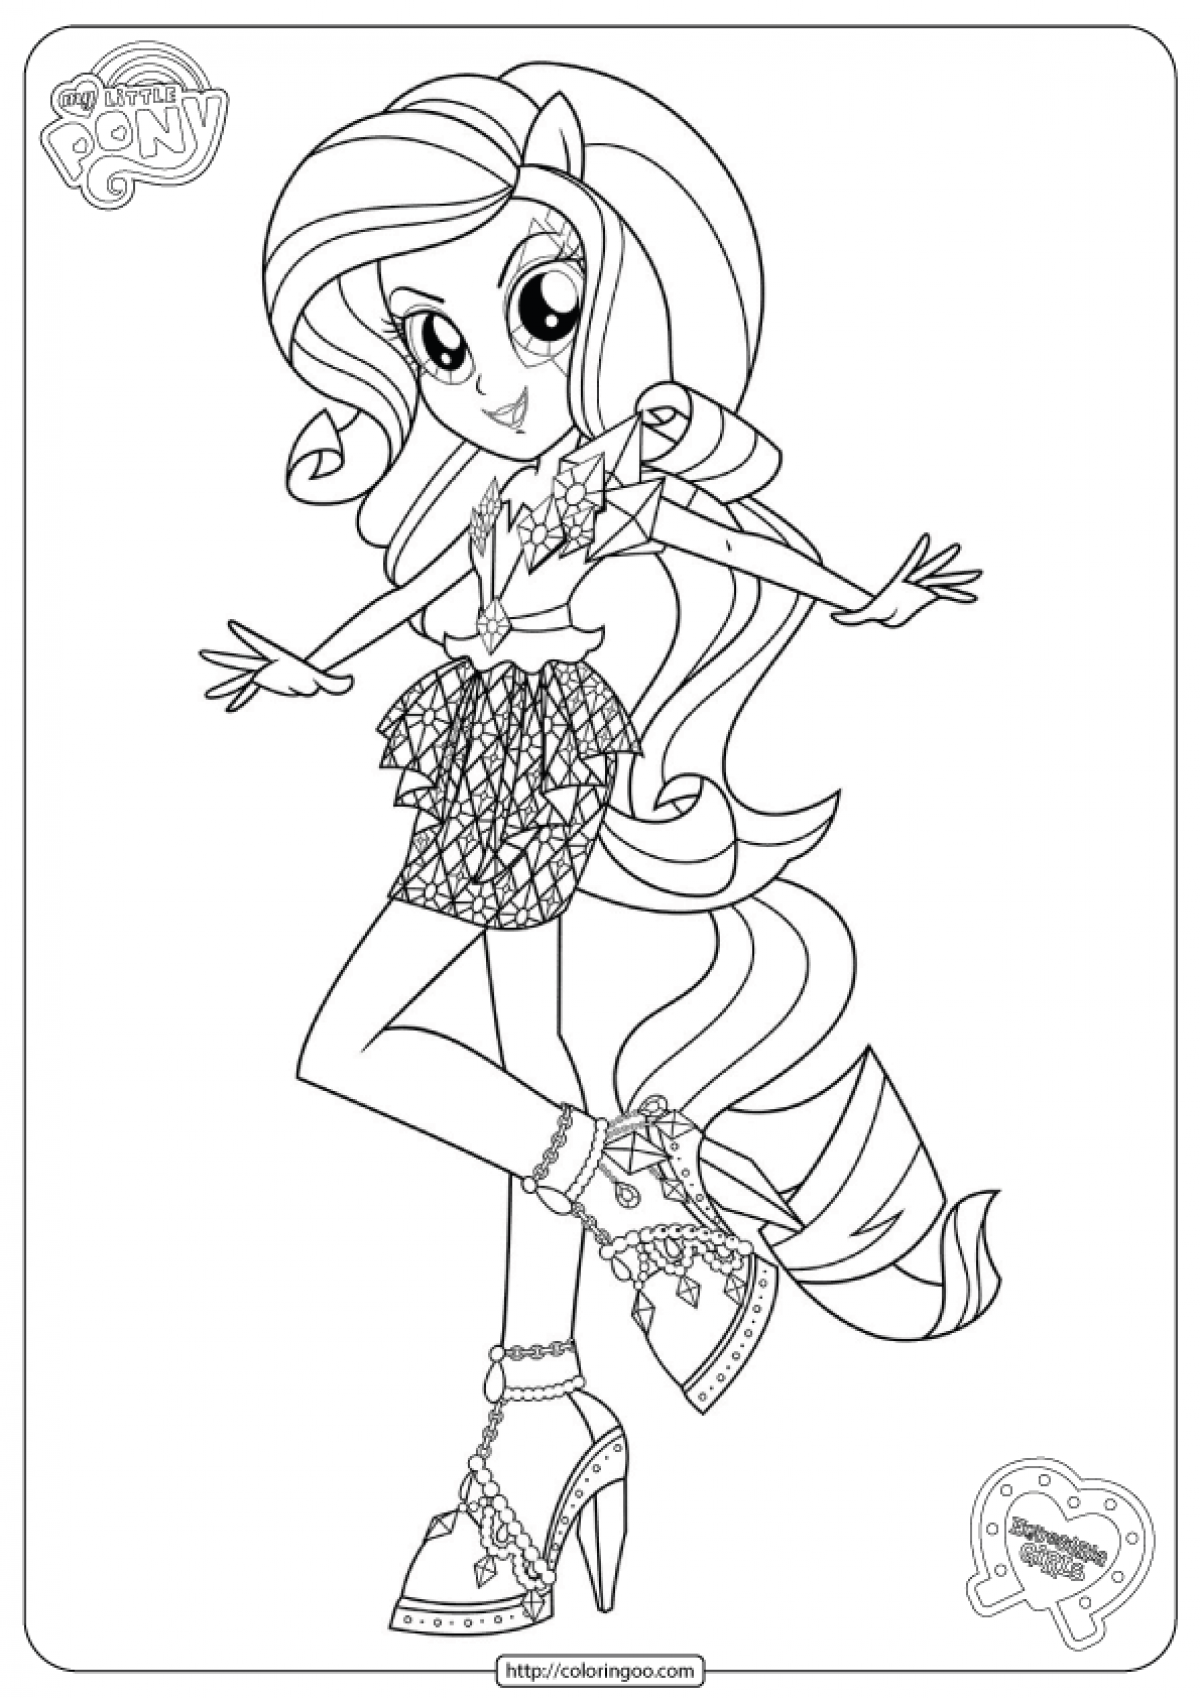 Rainbow High Colouring Pages GBRgot1